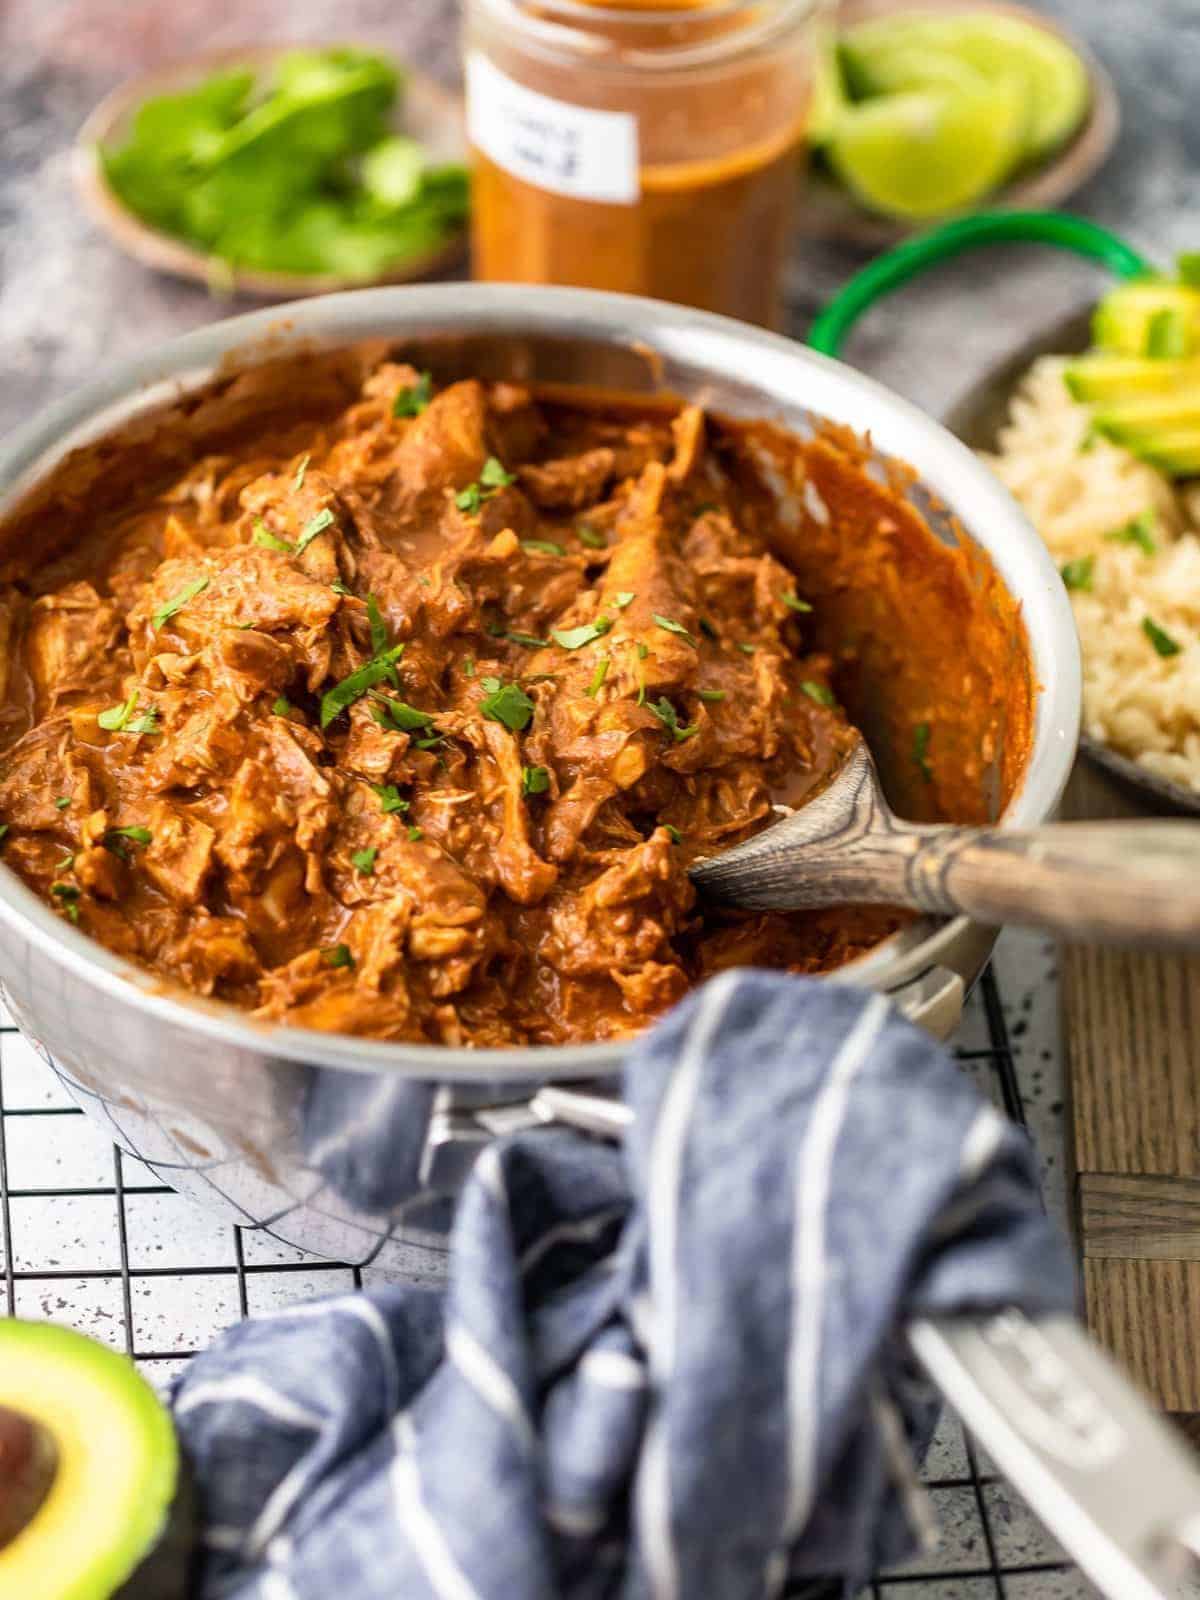 Easy Mole Sauce is such a great addition to your favorite meals! We love Chicken Mole and learning how to make this Homemade Mole Sauce has made all the difference for our best Mexican recipe!